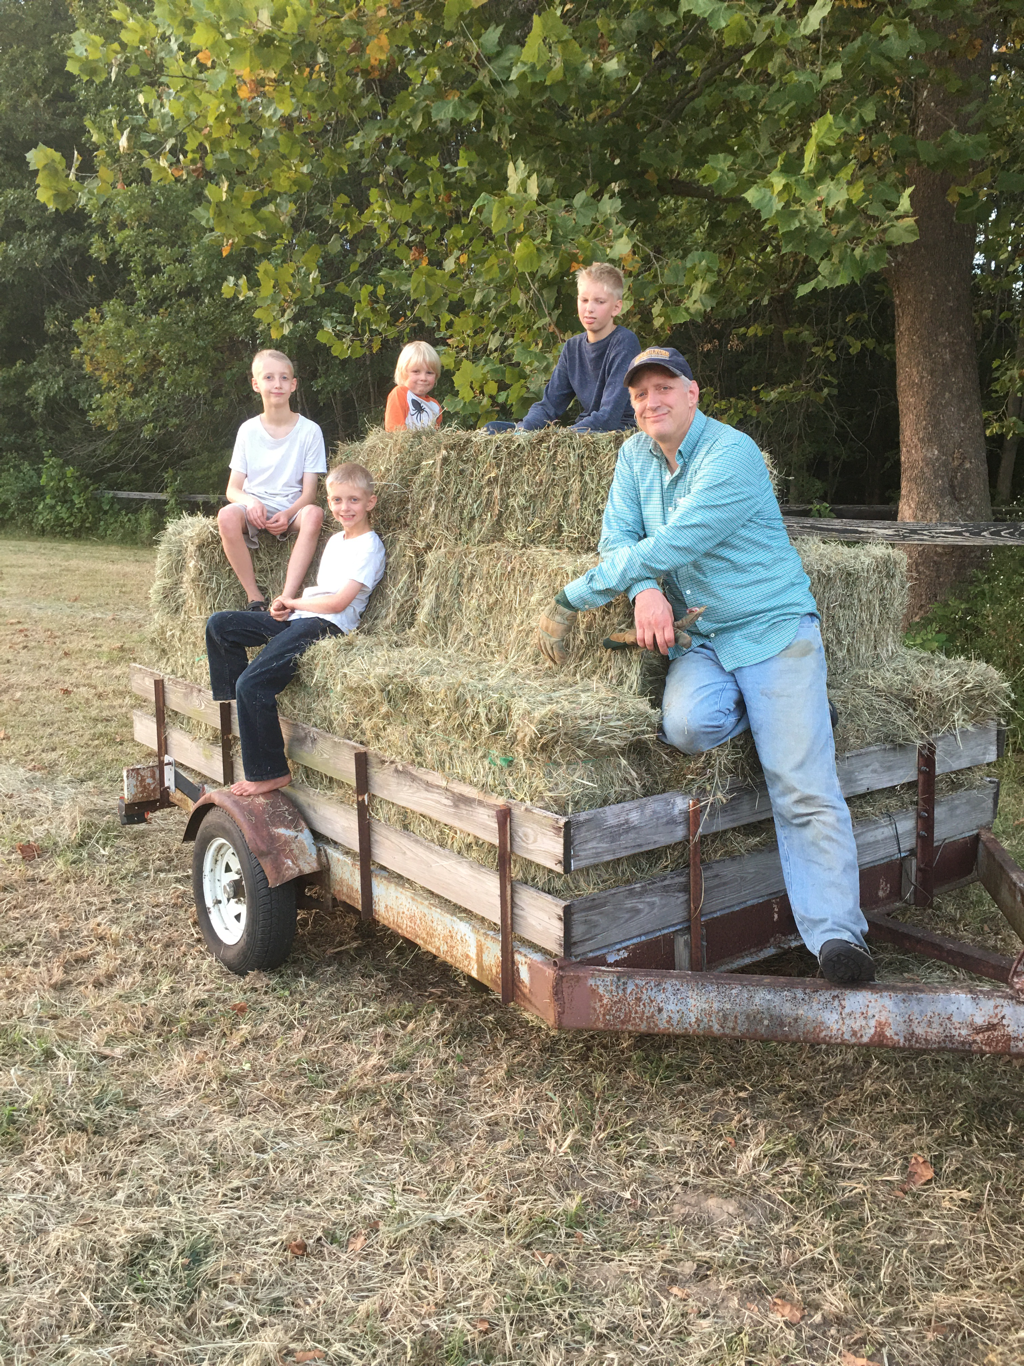 Steve and the boys posing on the hay wagon.